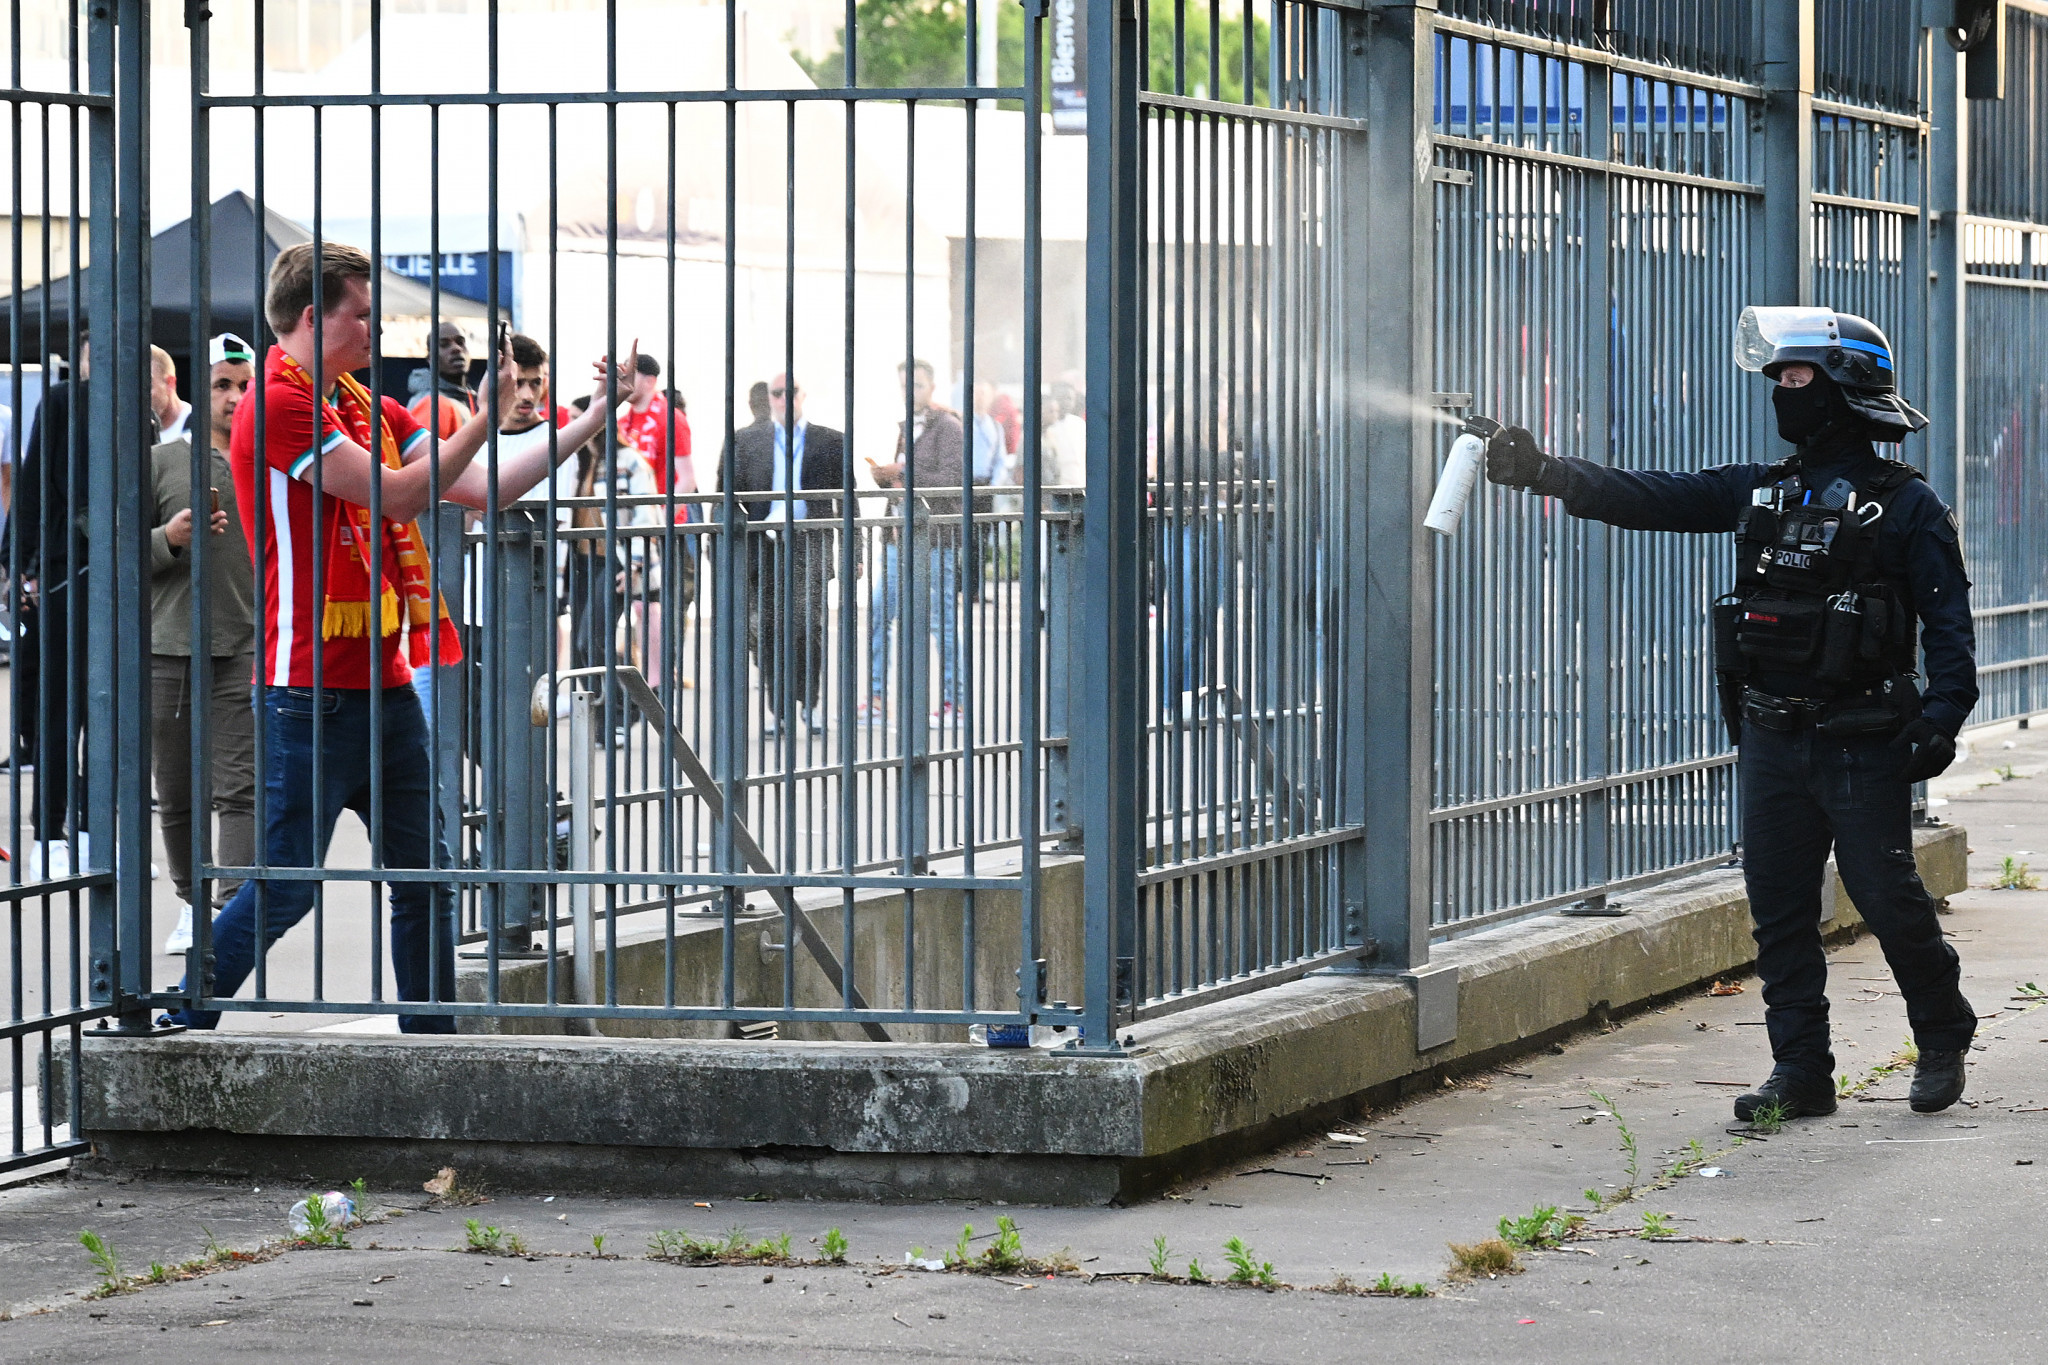 Shambolic security arrangements for the Champion League final have stoked safety fears for Paris 2024 ©Getty Images